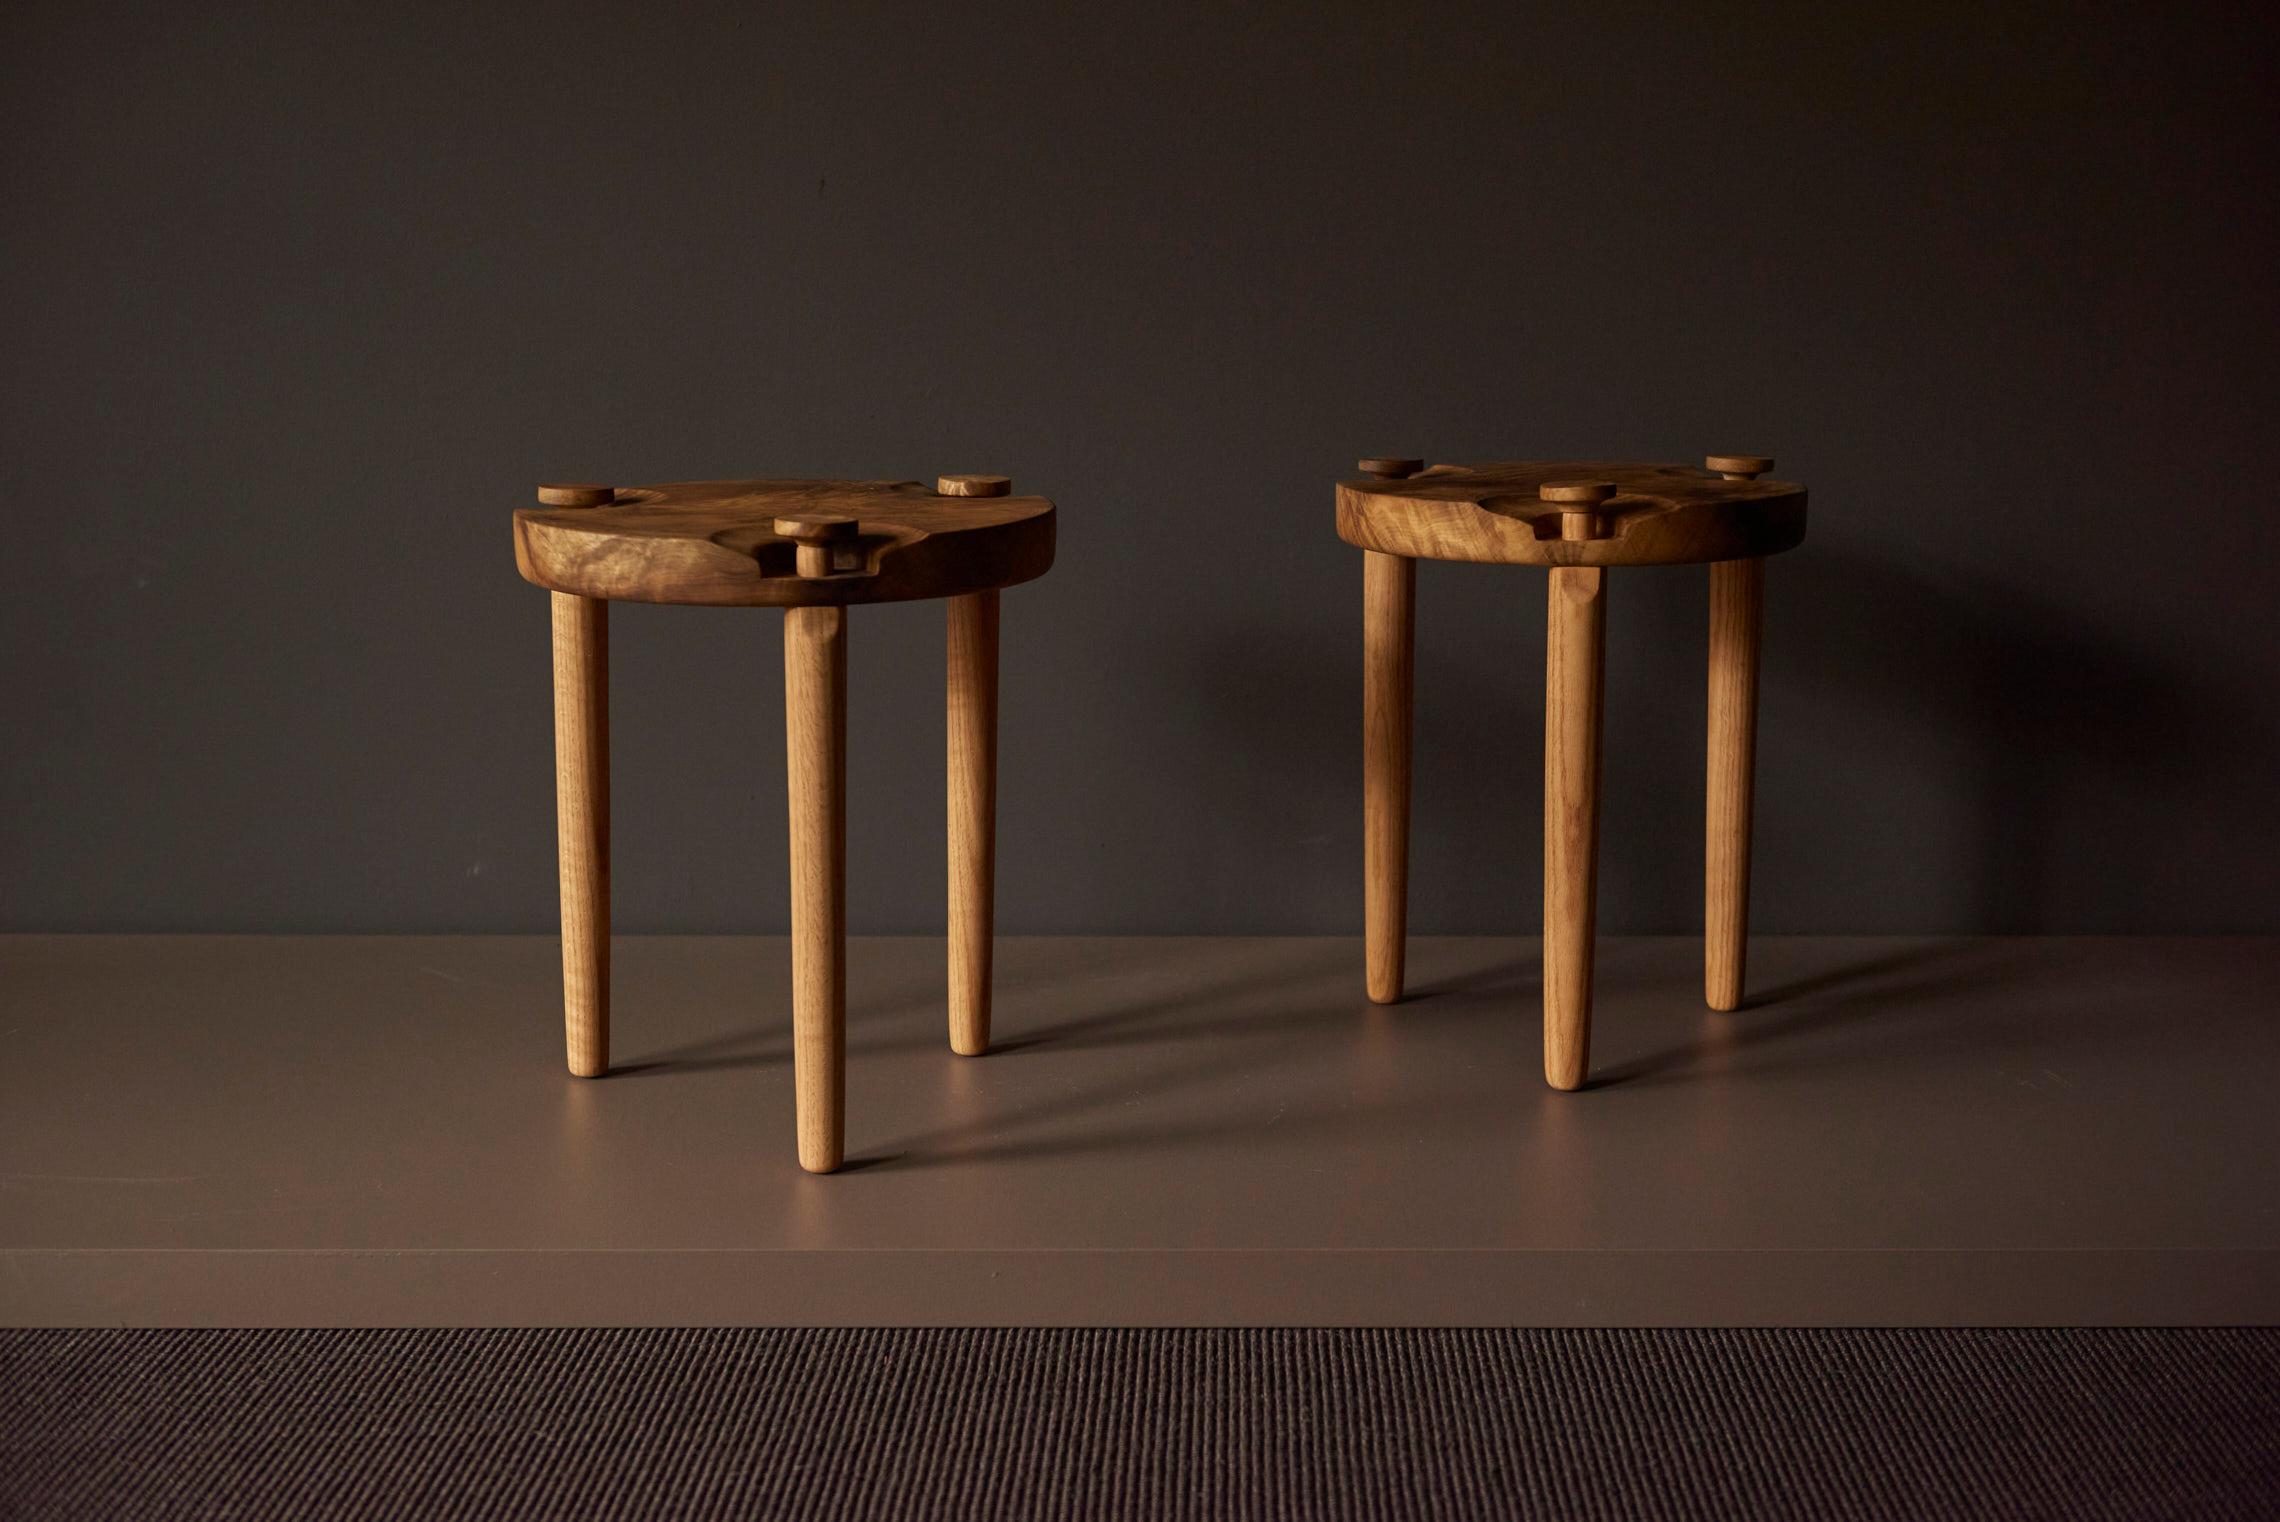 Pair of side tables in white oak burl top and curly red oak legs by Michael Rozell made in USA, 2020. Signed!